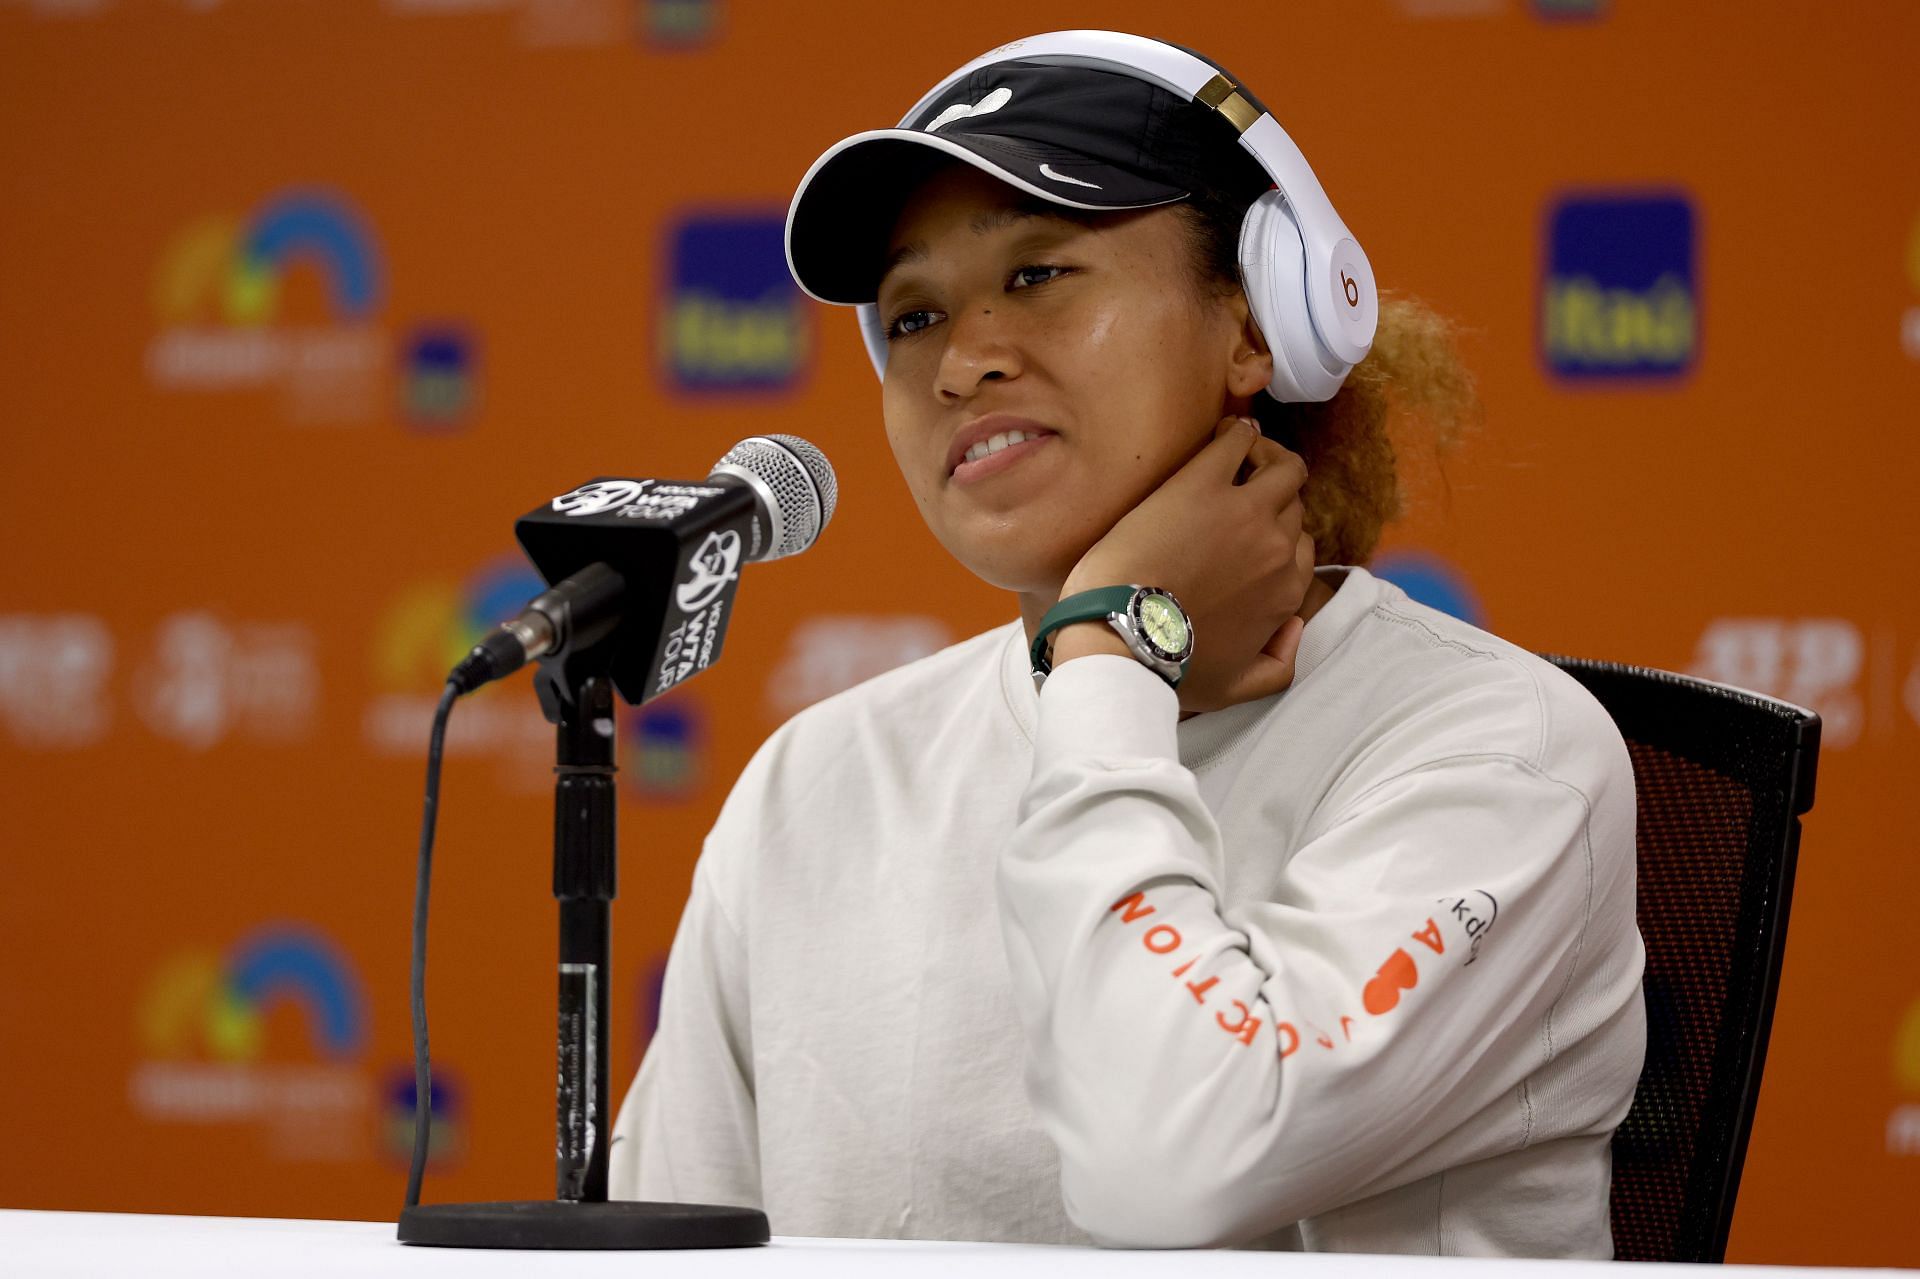 Naomi Osaka is in the second round of the Miami Open